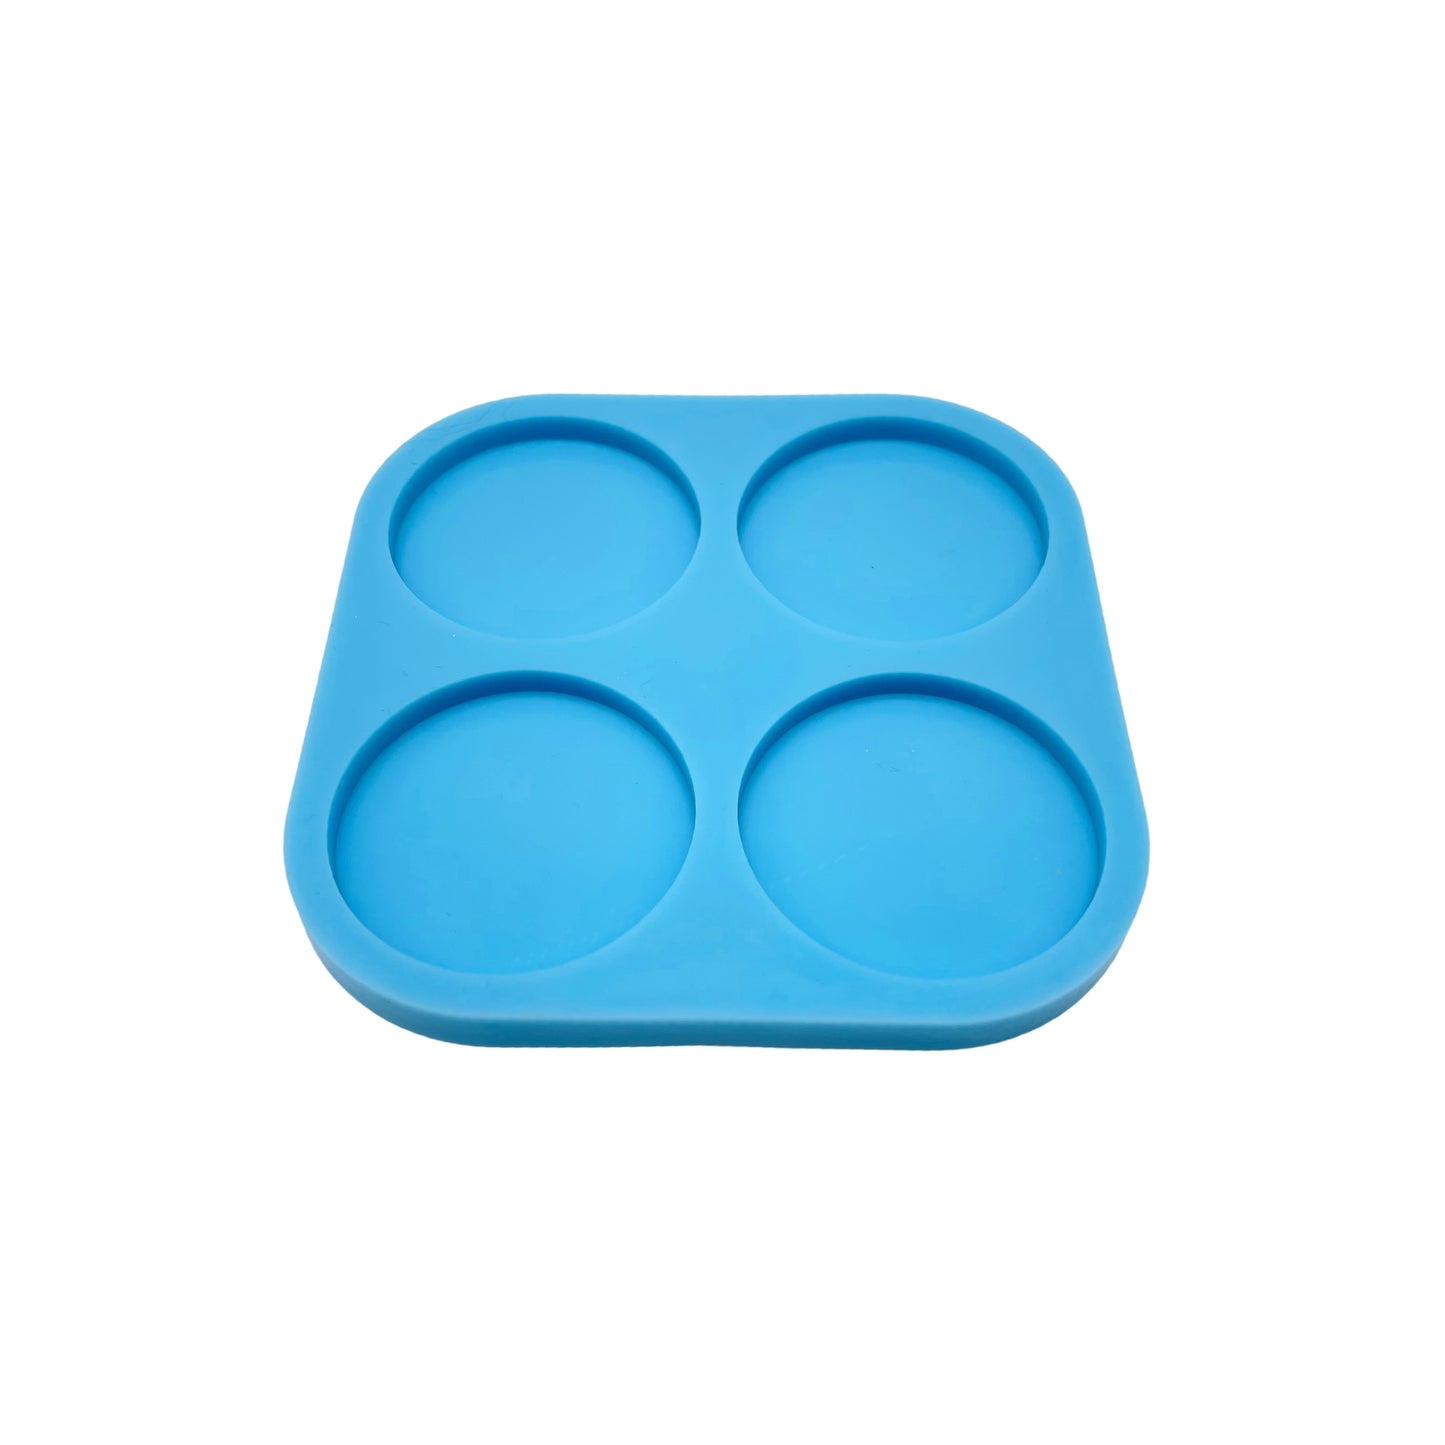 Blue silicone resin mold of 4 circles for Phone Grip pop.